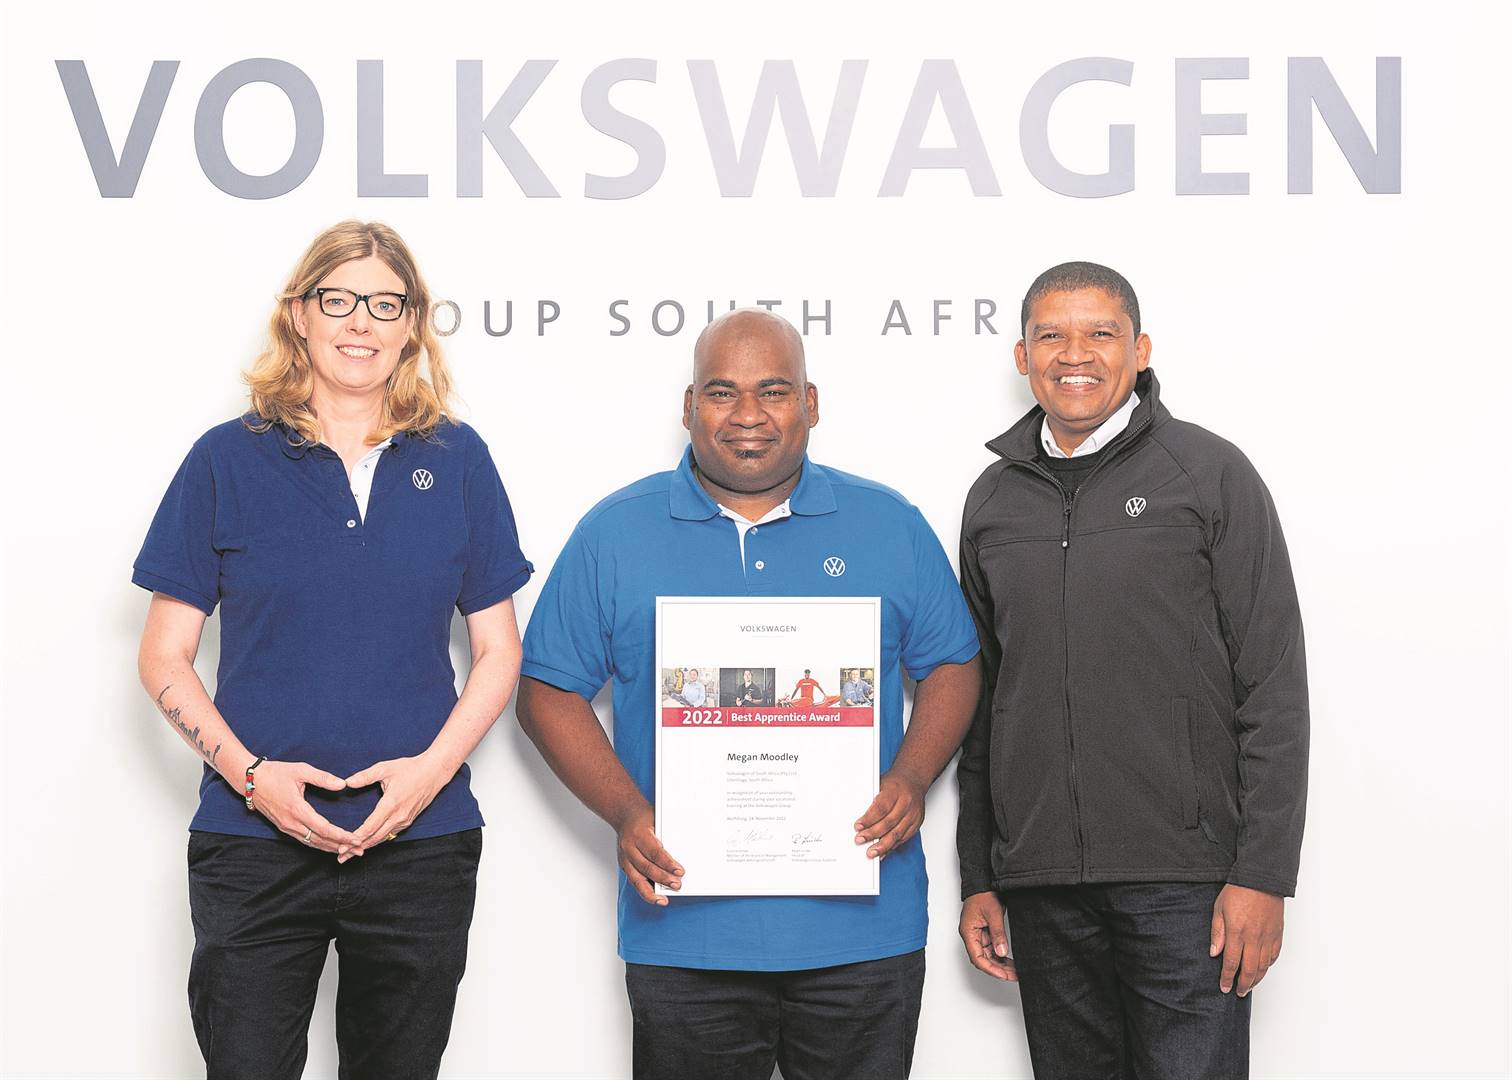 Seen here are (from left) Martina Biene (VWSA Chairperson and Managing Director), Megan Moodley (Best Apprentice) and Russell Coleman (VWSA HR Director).          Photo:VWSA/DAVID DETTMANN